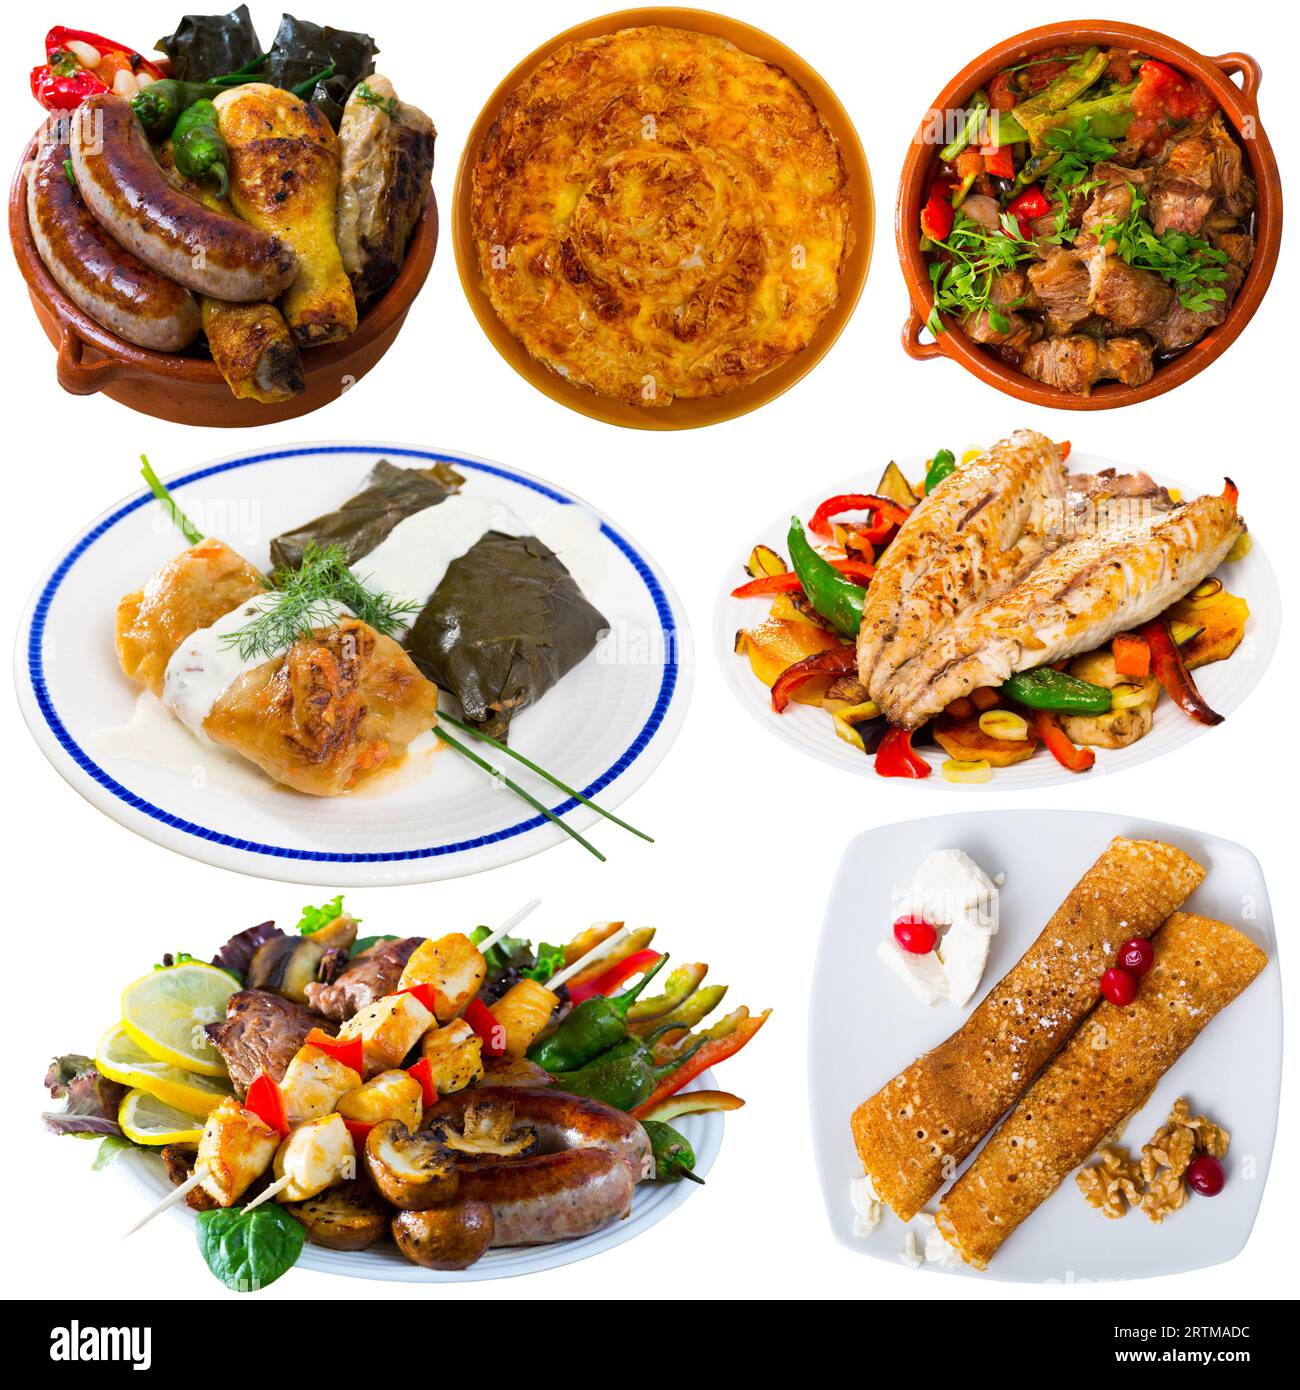 Dishes of traditional Bulgarian cuisine with meat, vegetables, tasty ingredients Stock Photo